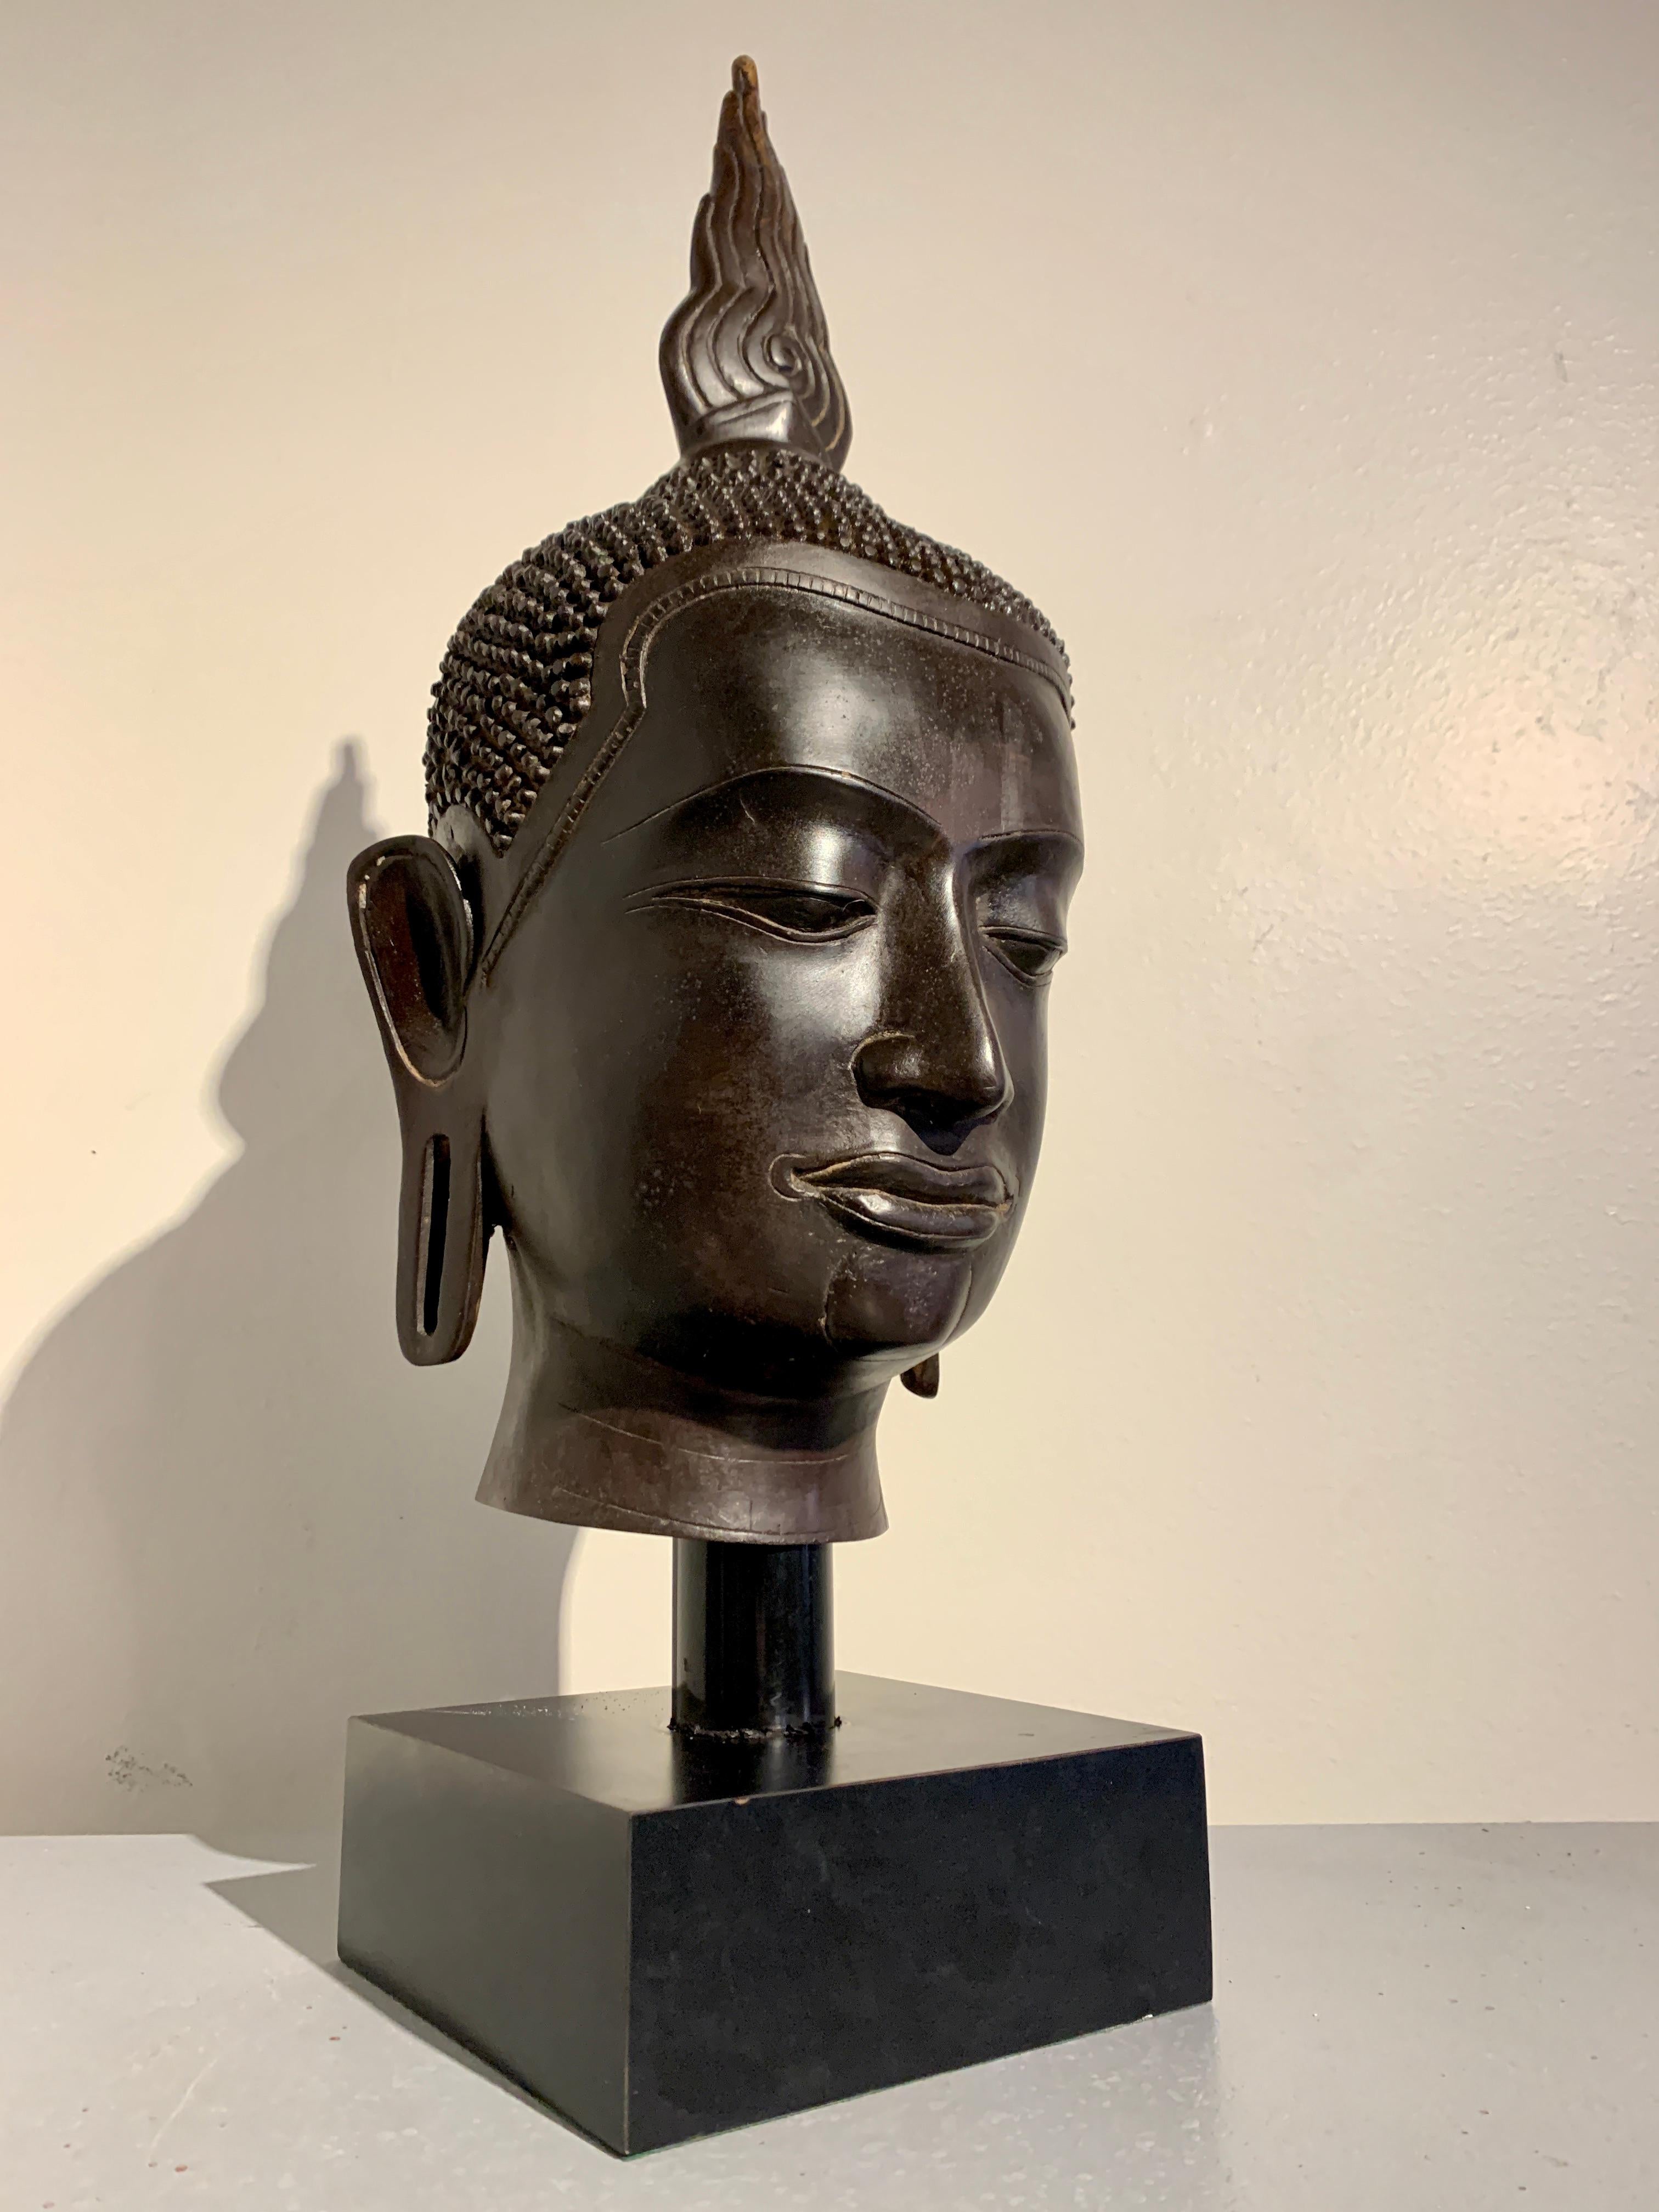 An large and impressive vintage Thai cast bronze Buddha head, U-Thong style, 1970's, Thailand.

The larger than life-sized head beautifully cast with refined details. The Buddha's face is slender, with squared off features. Downcast almond shaped